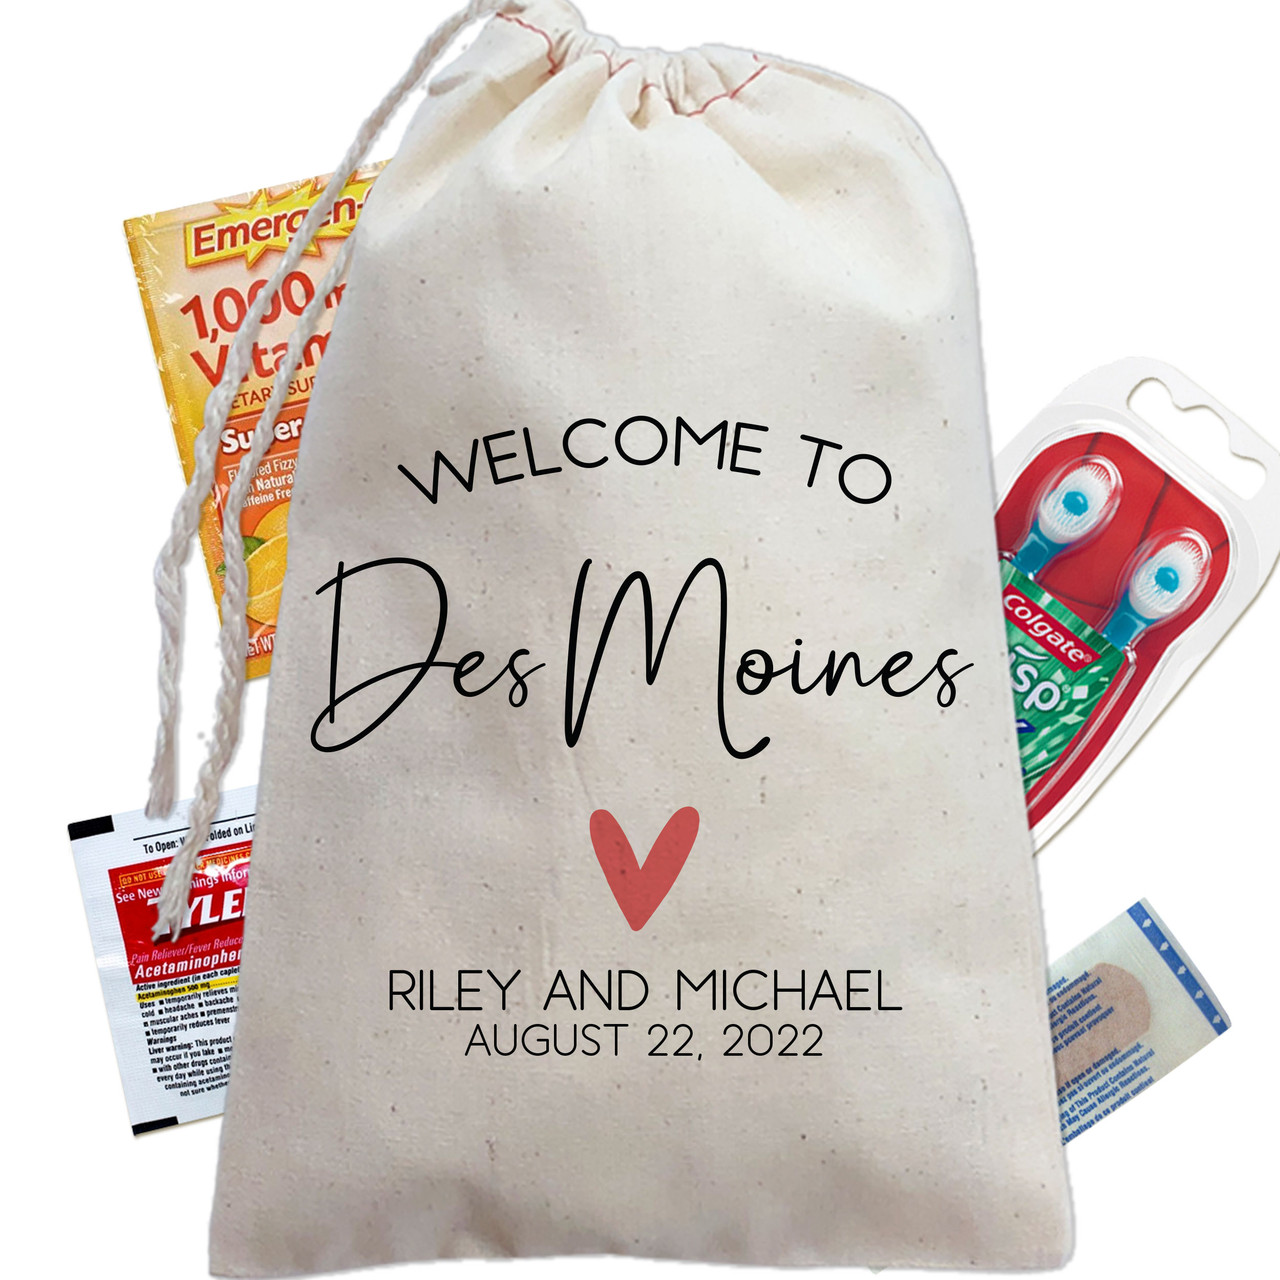 Welcome Bag, Wedding Welcome Bag, Welcome Bag Kit, Hotel Bags, Welcome  Letter, Wedding Guest Bag, WELCOME BAG 